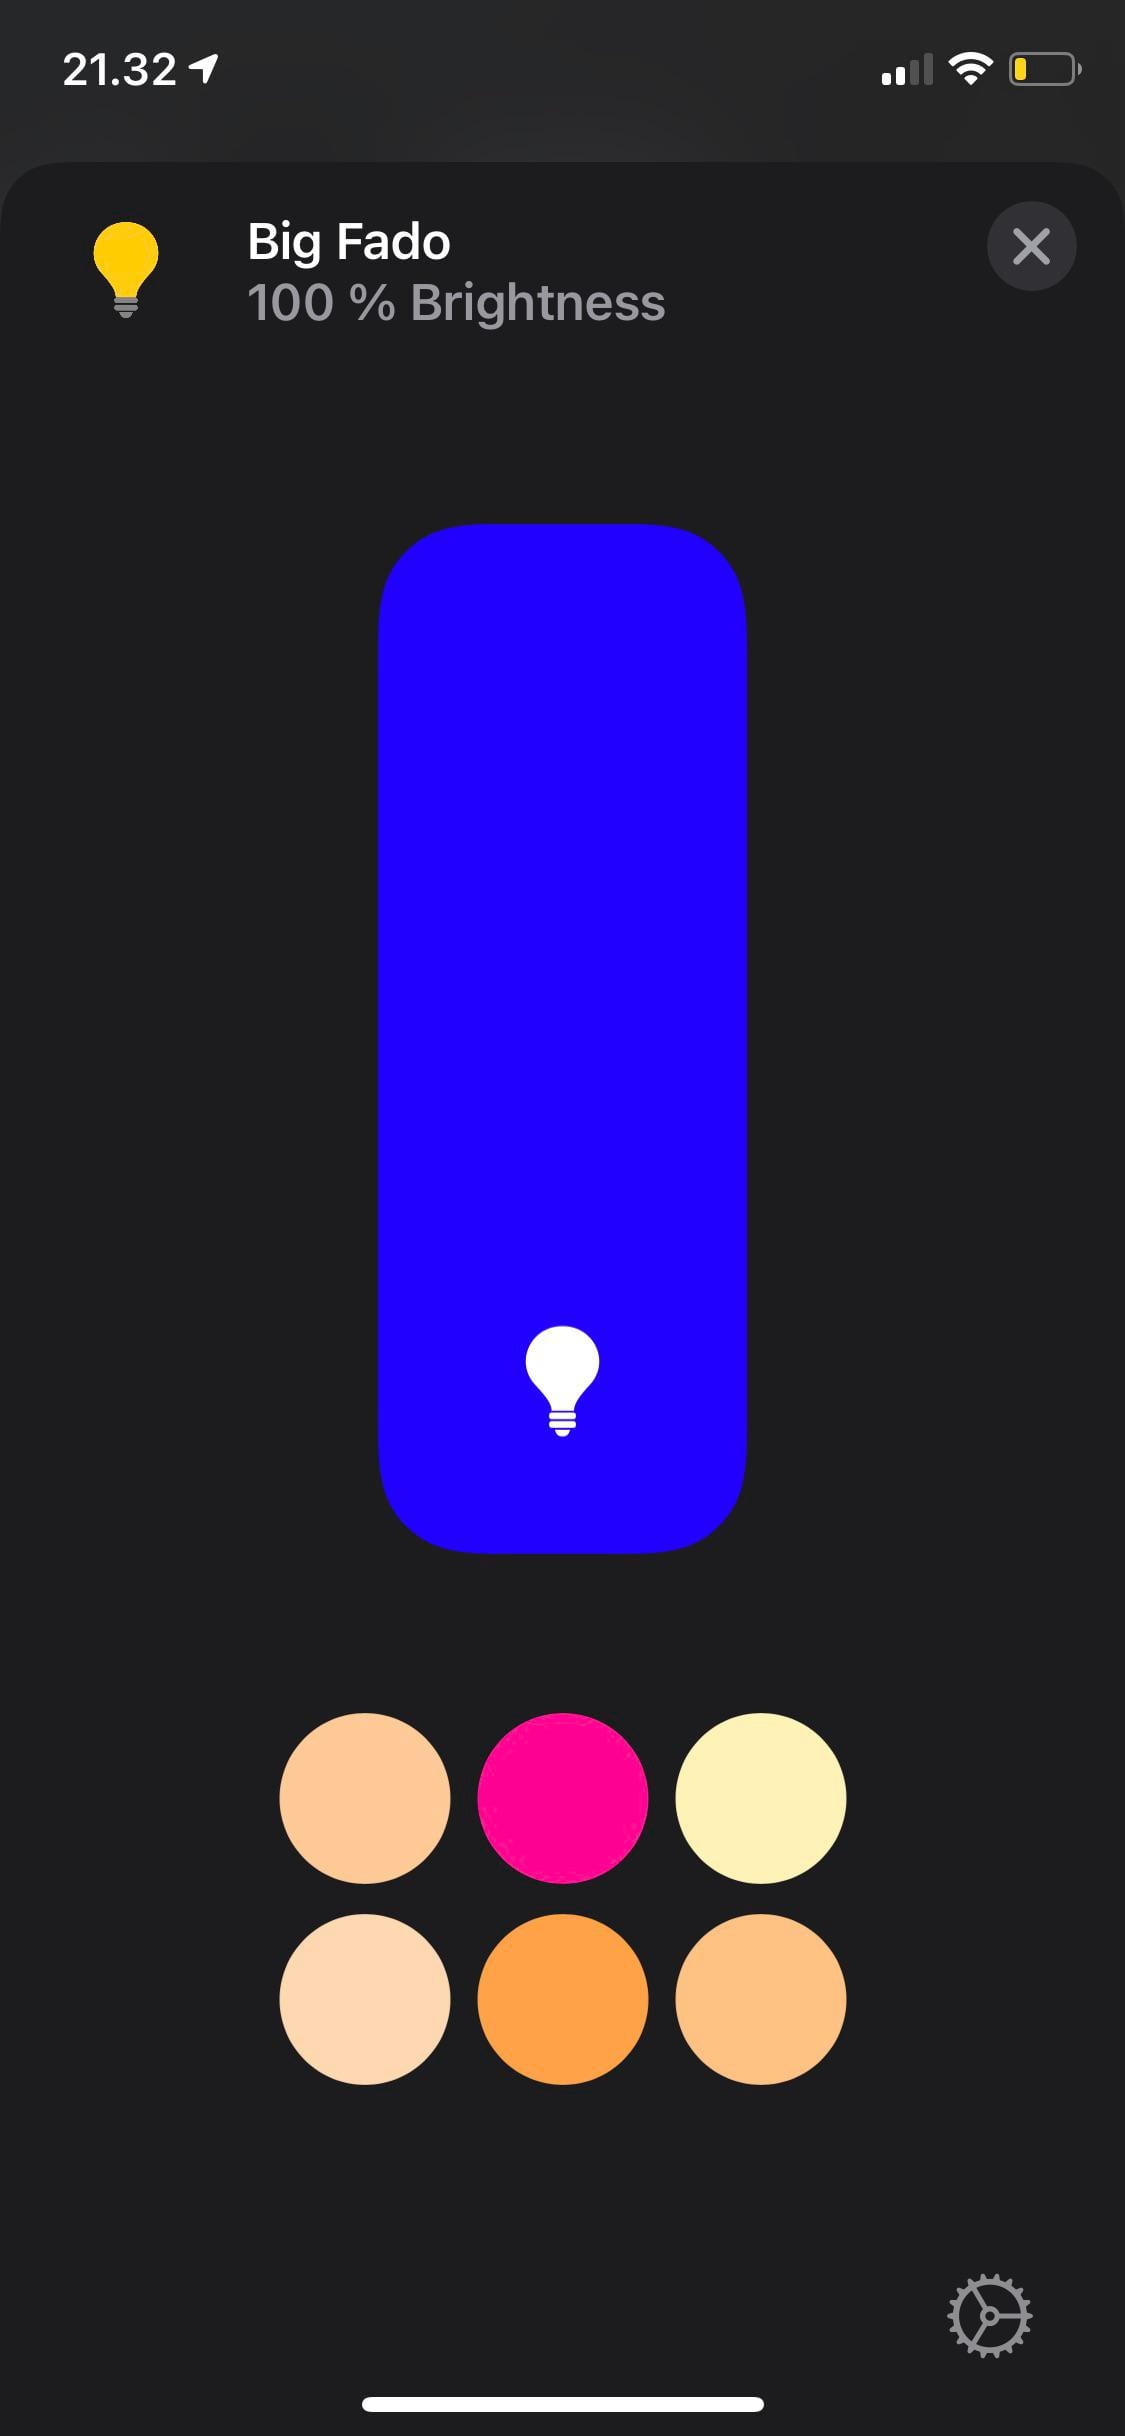 Any way to get the current color of a light